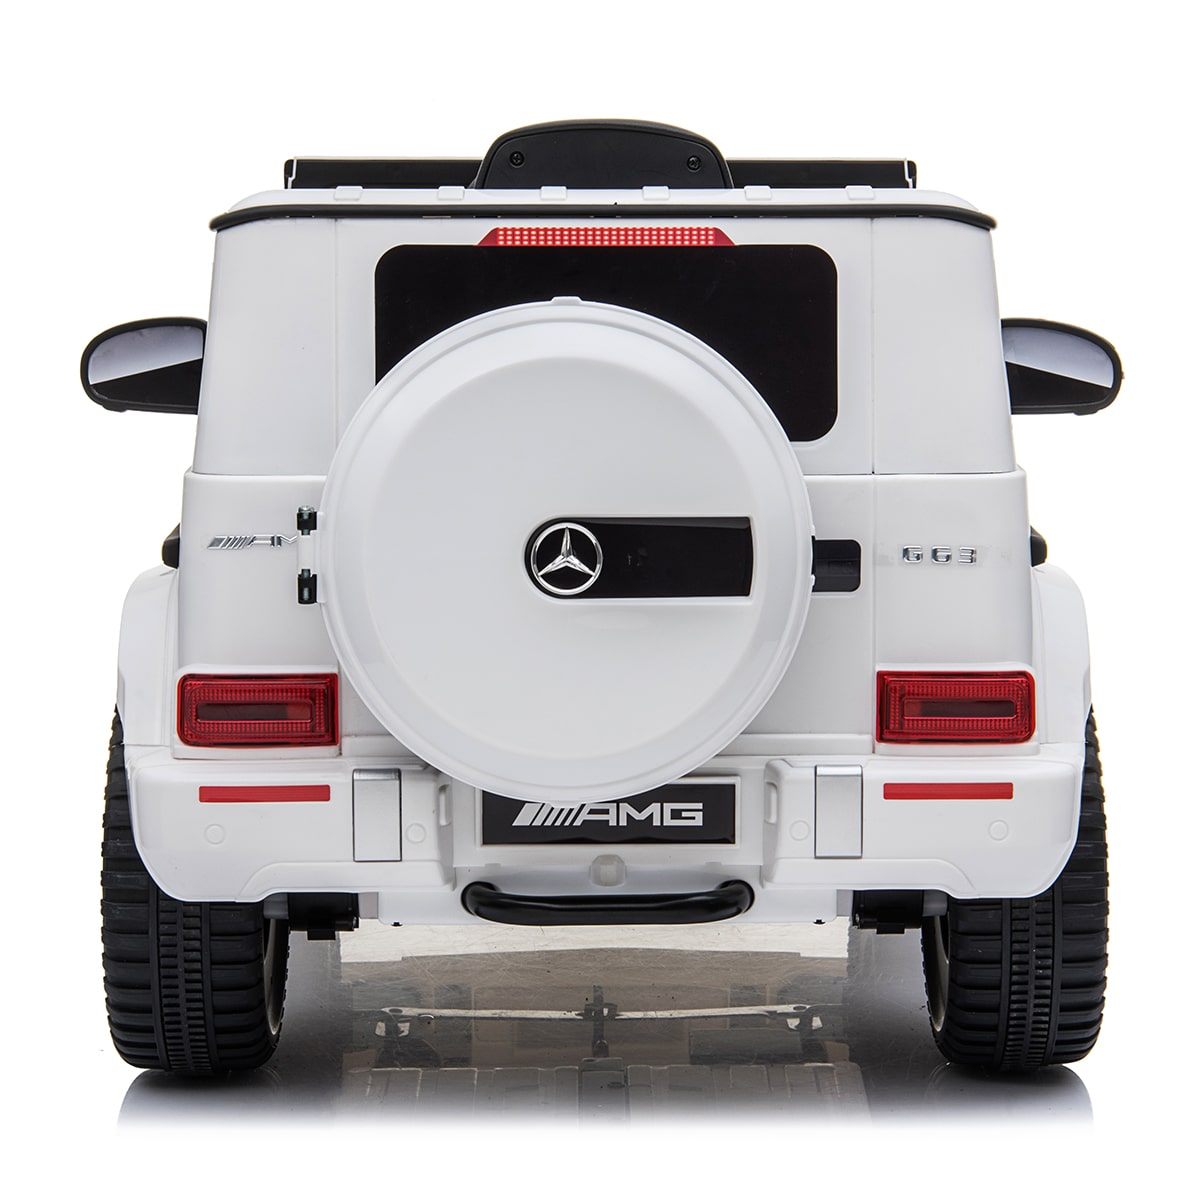 "White Mercedes-Benz G63 AMG Electric Ride-on Car for Kids on a White Background."